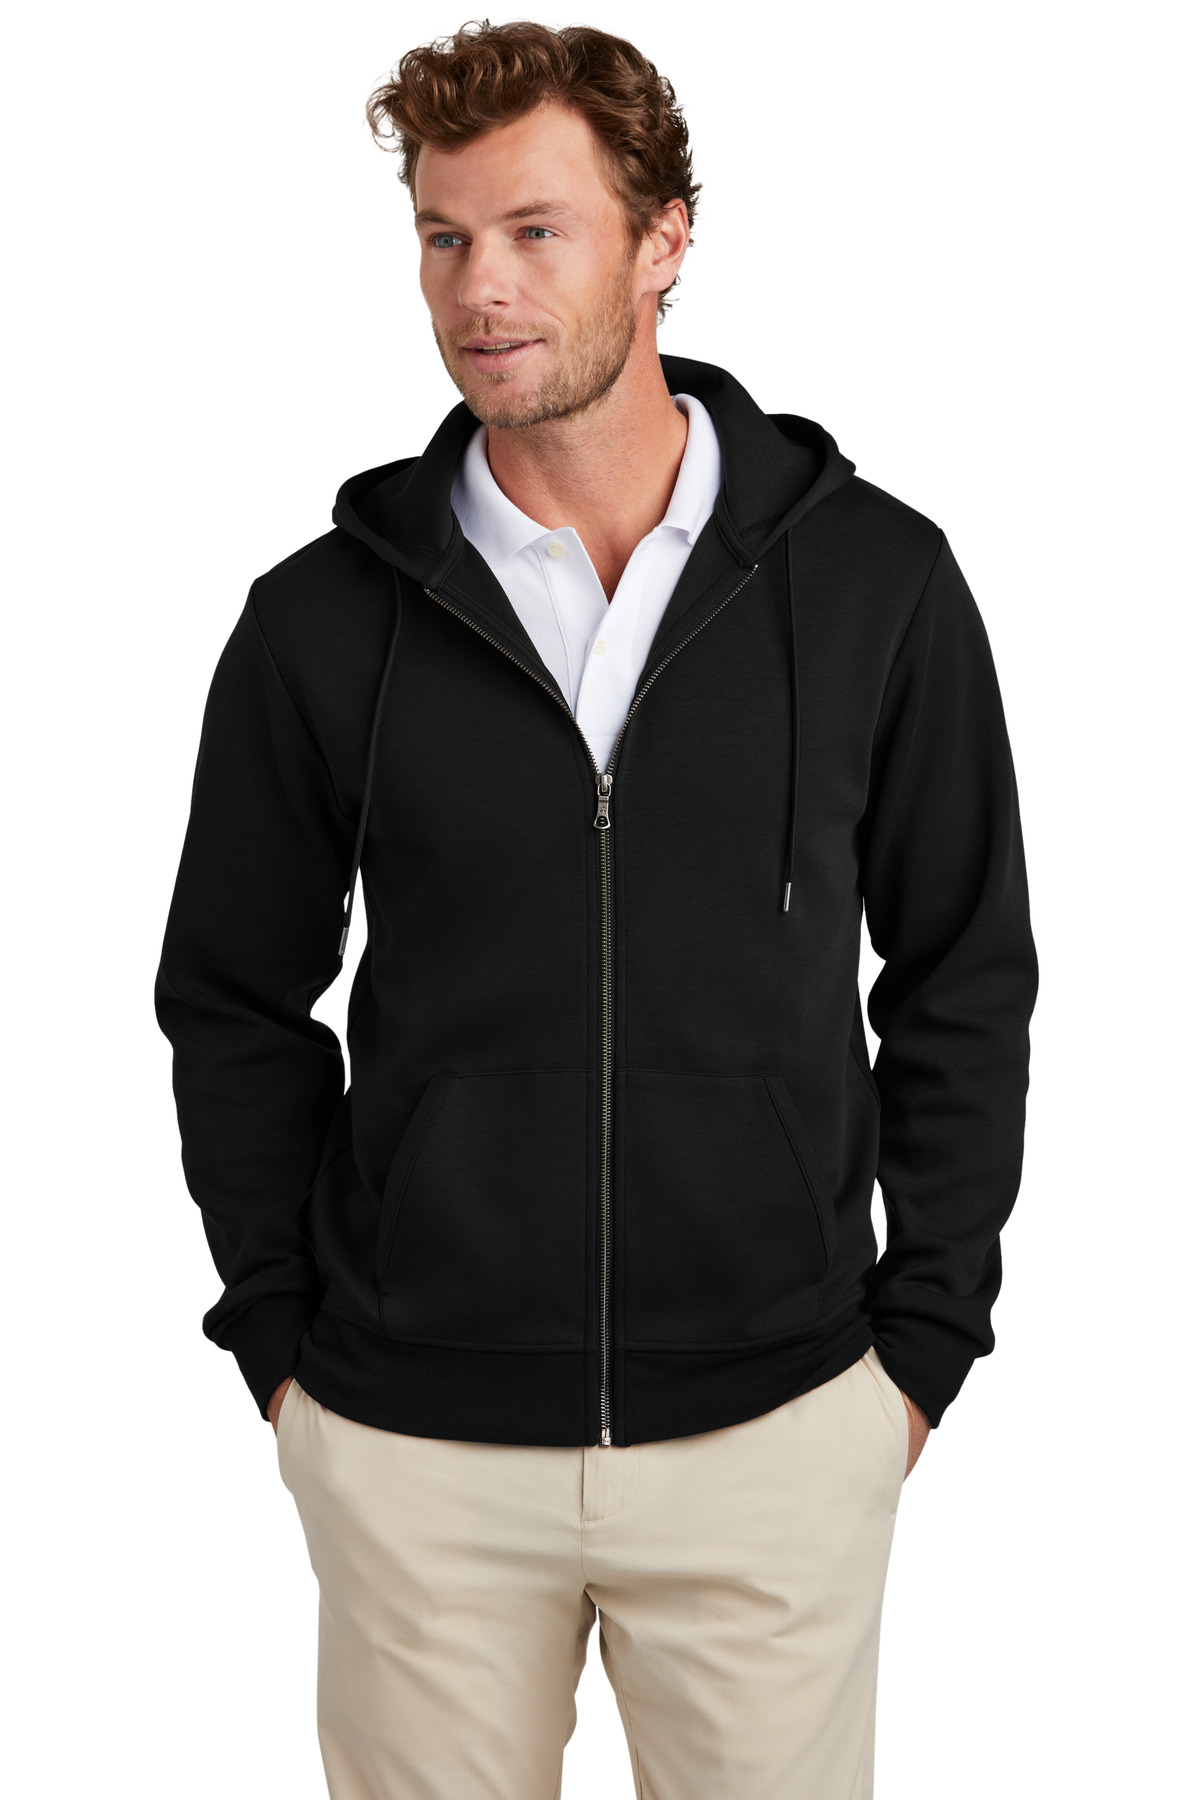 Brooks Brothers Double-Knit Full-Zip Hoodie-Brooks Brothers